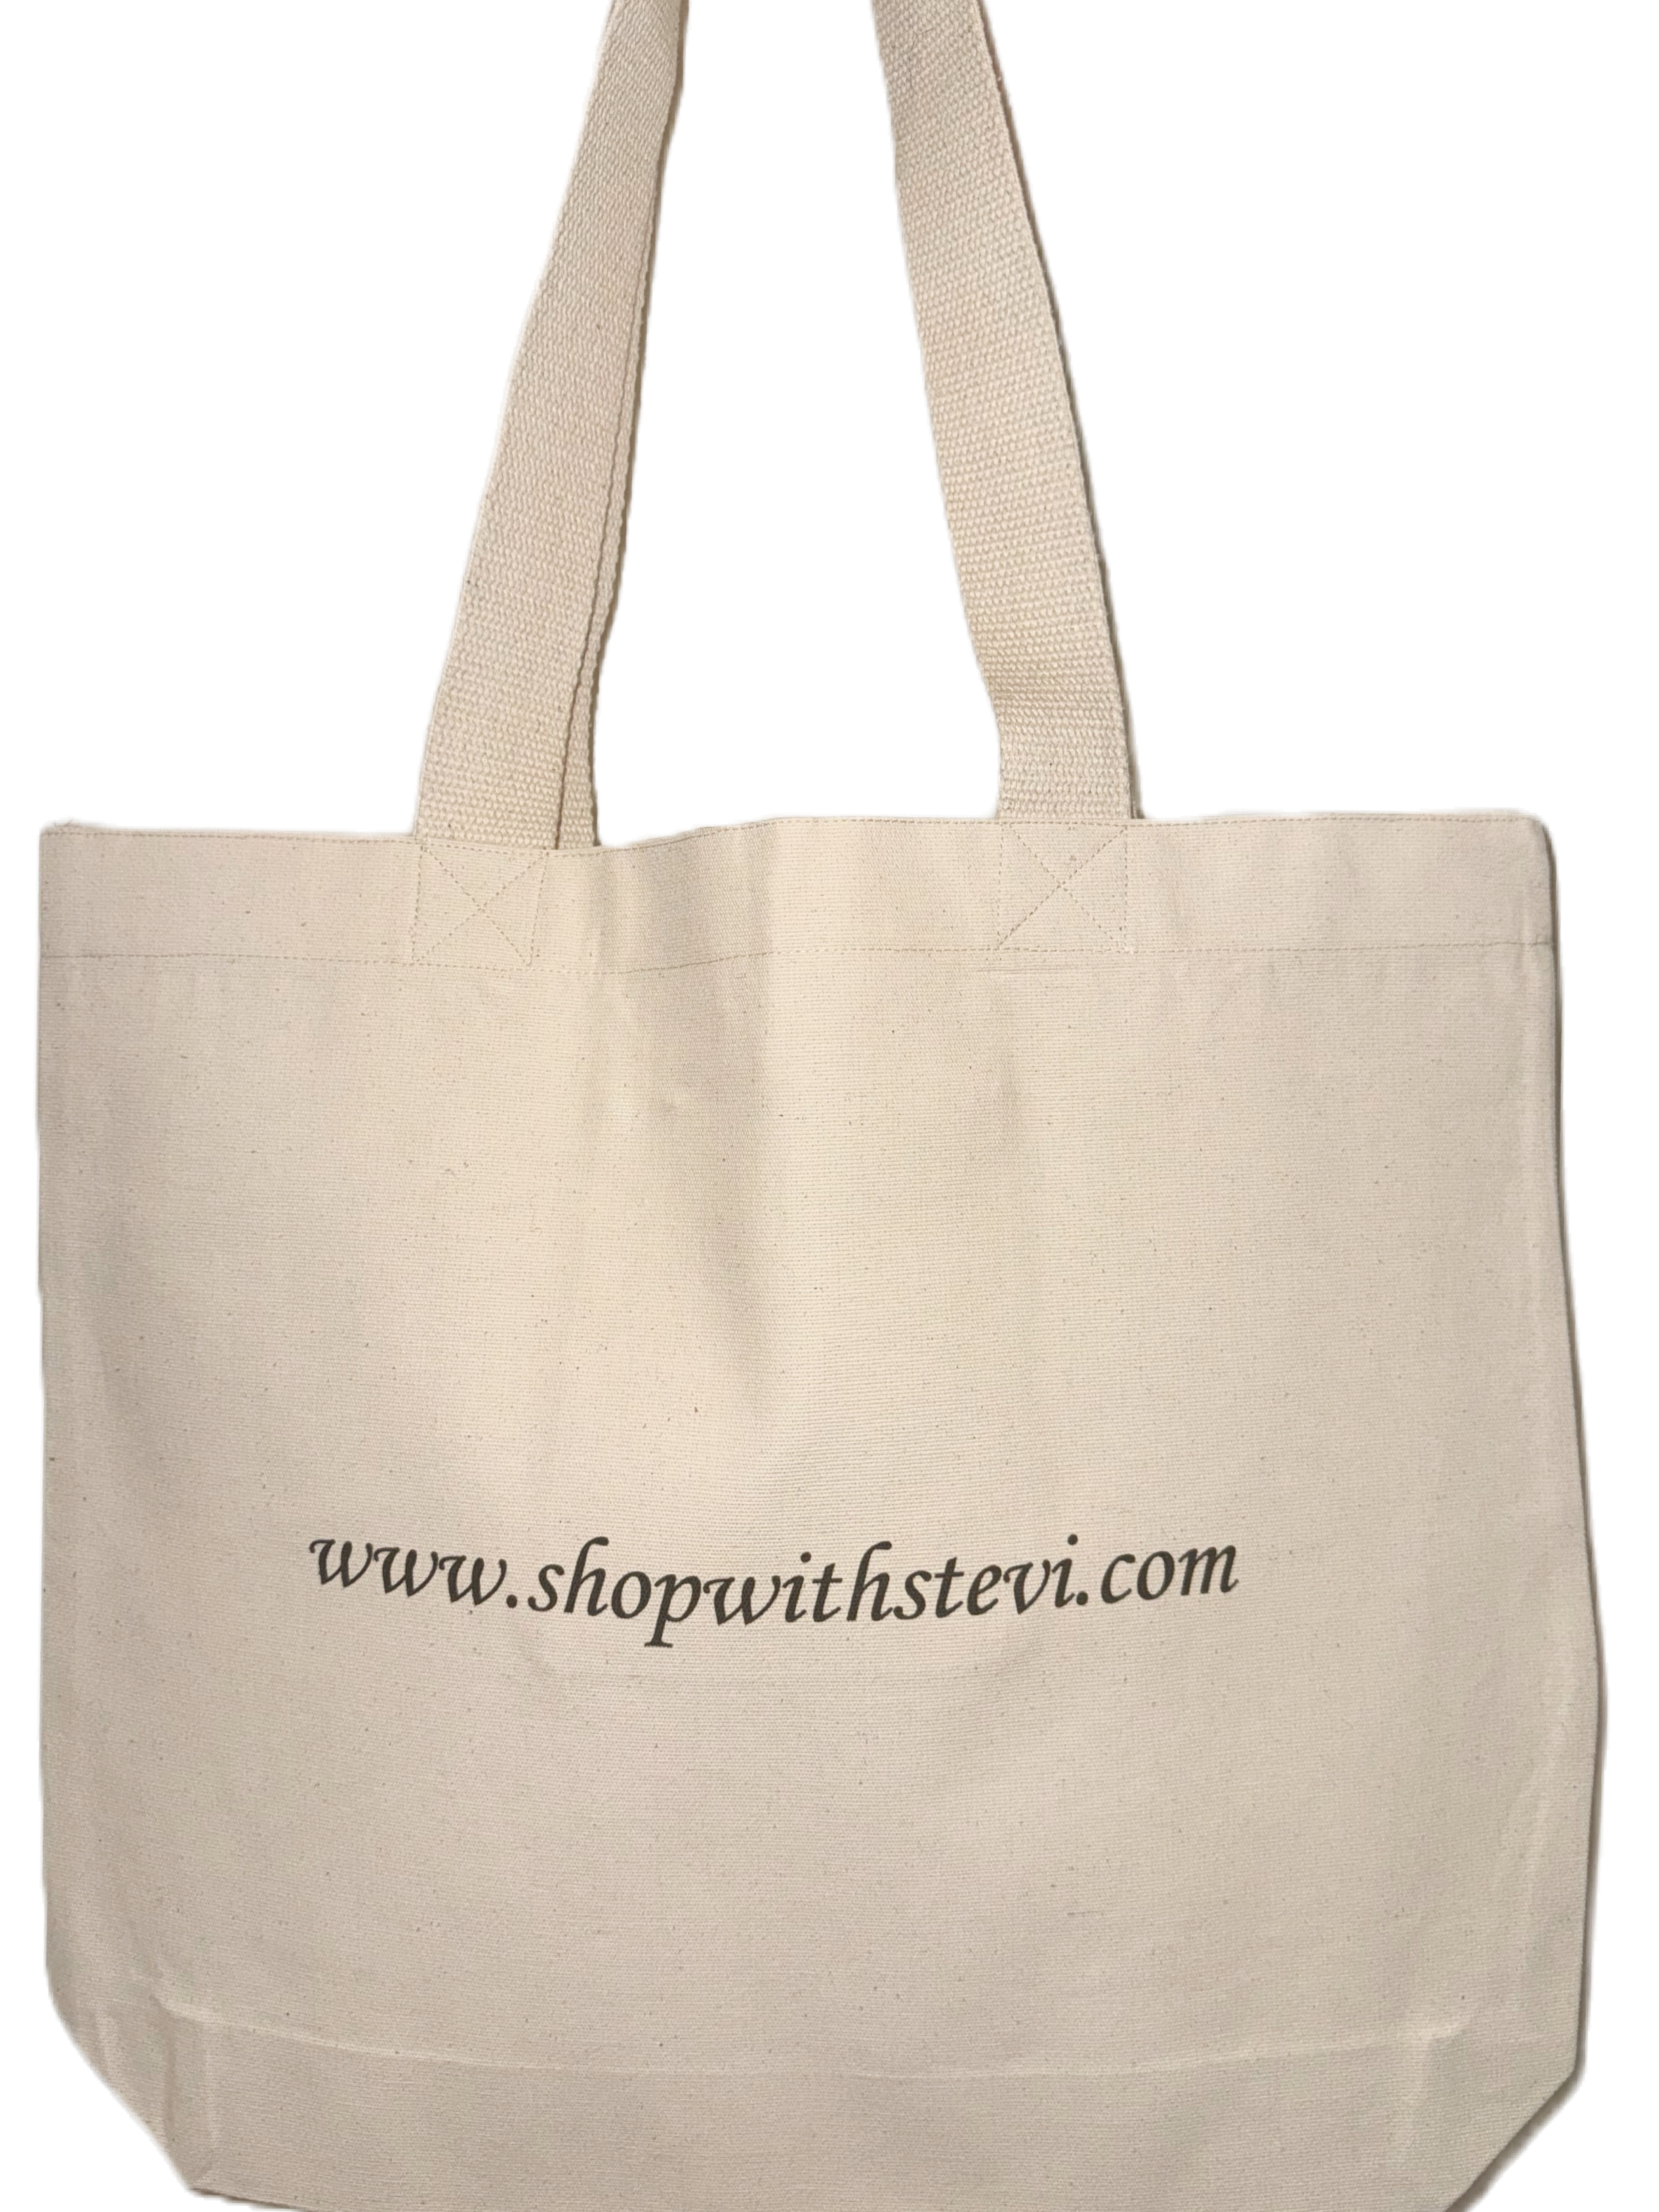 Limited Edition ShopwithStevi Tote Bag